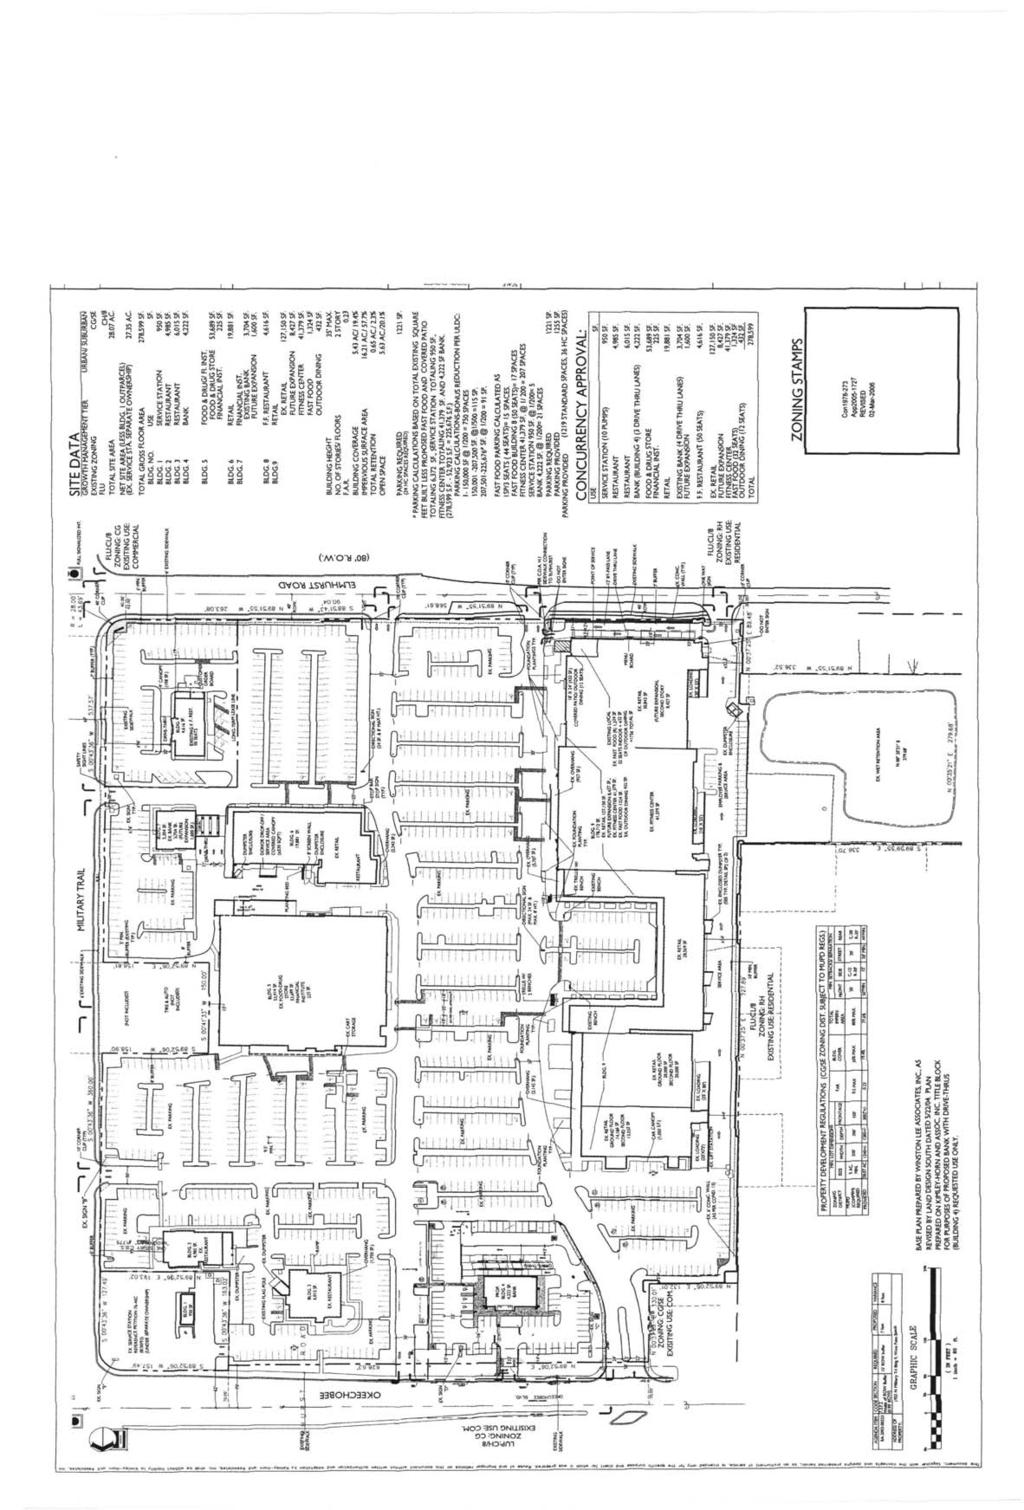 SITE PLAN DATED